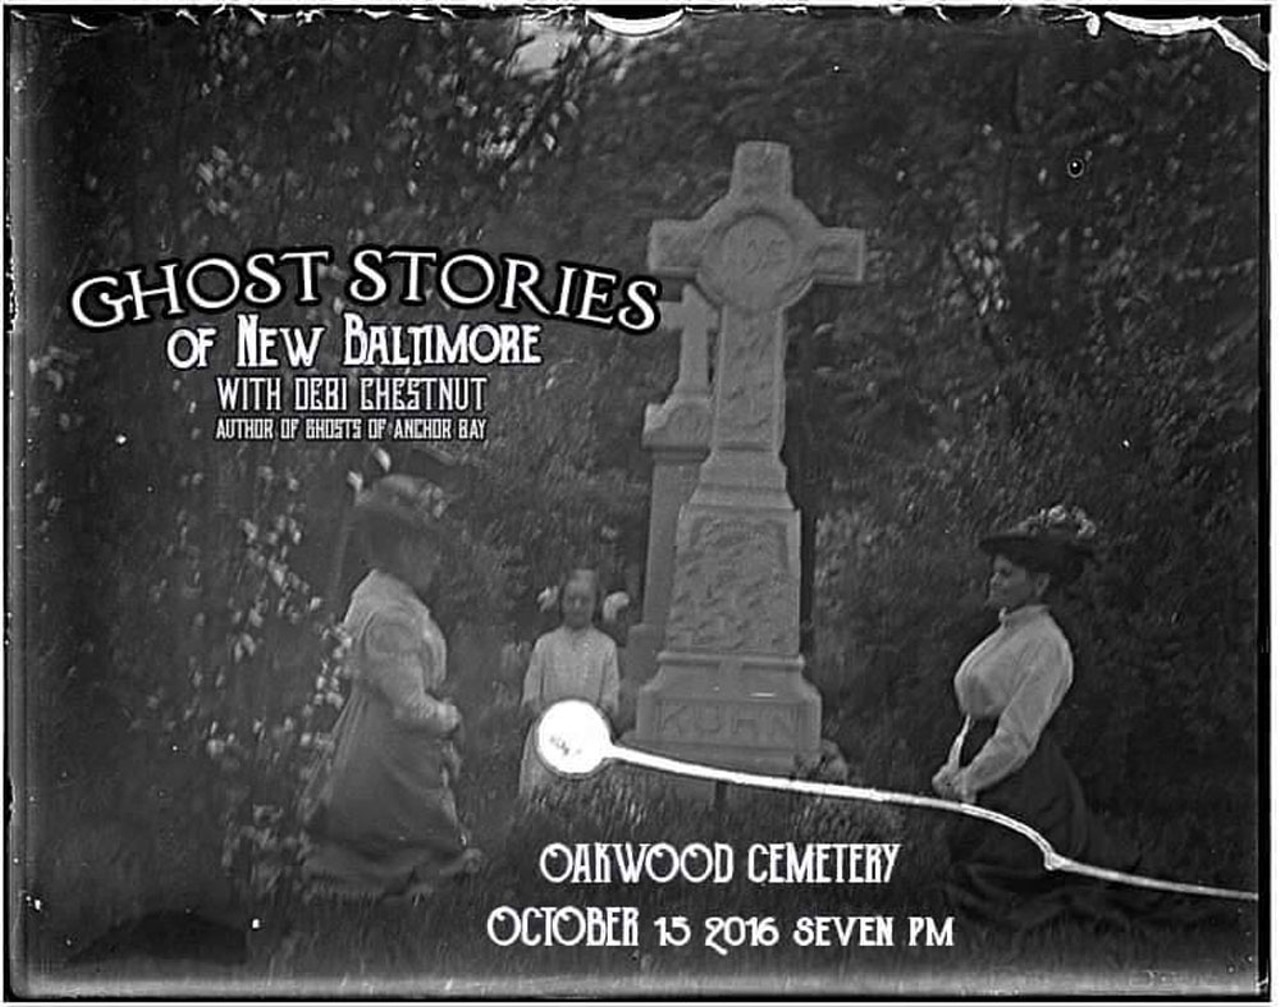 If you&#146;re looking to freak yourself out, the New Boston Historical Society invites you to join author Debi Chestnut (Ghosts of Anchor Bay) on a tour of Oakwood Cemetery, which many consider, along with the Hathaway House and the Morris House to be among the creepiest places in New Baltimore. You&#146;ll definitely be spooked as they tell you all about the roaming spirits under that night&#146;s full moon. Paranormal investigators are pretty certain this place has some considerable activity, so go if you dare. 
Saturday, 10/15; Ghost Stories of New Baltimore @ Oakwood Cemetery The tour starts at 7 p.m.; 35900 24 Mile Rd., New Baltimore; newbaltimorehistorical.org; admittance is $5.